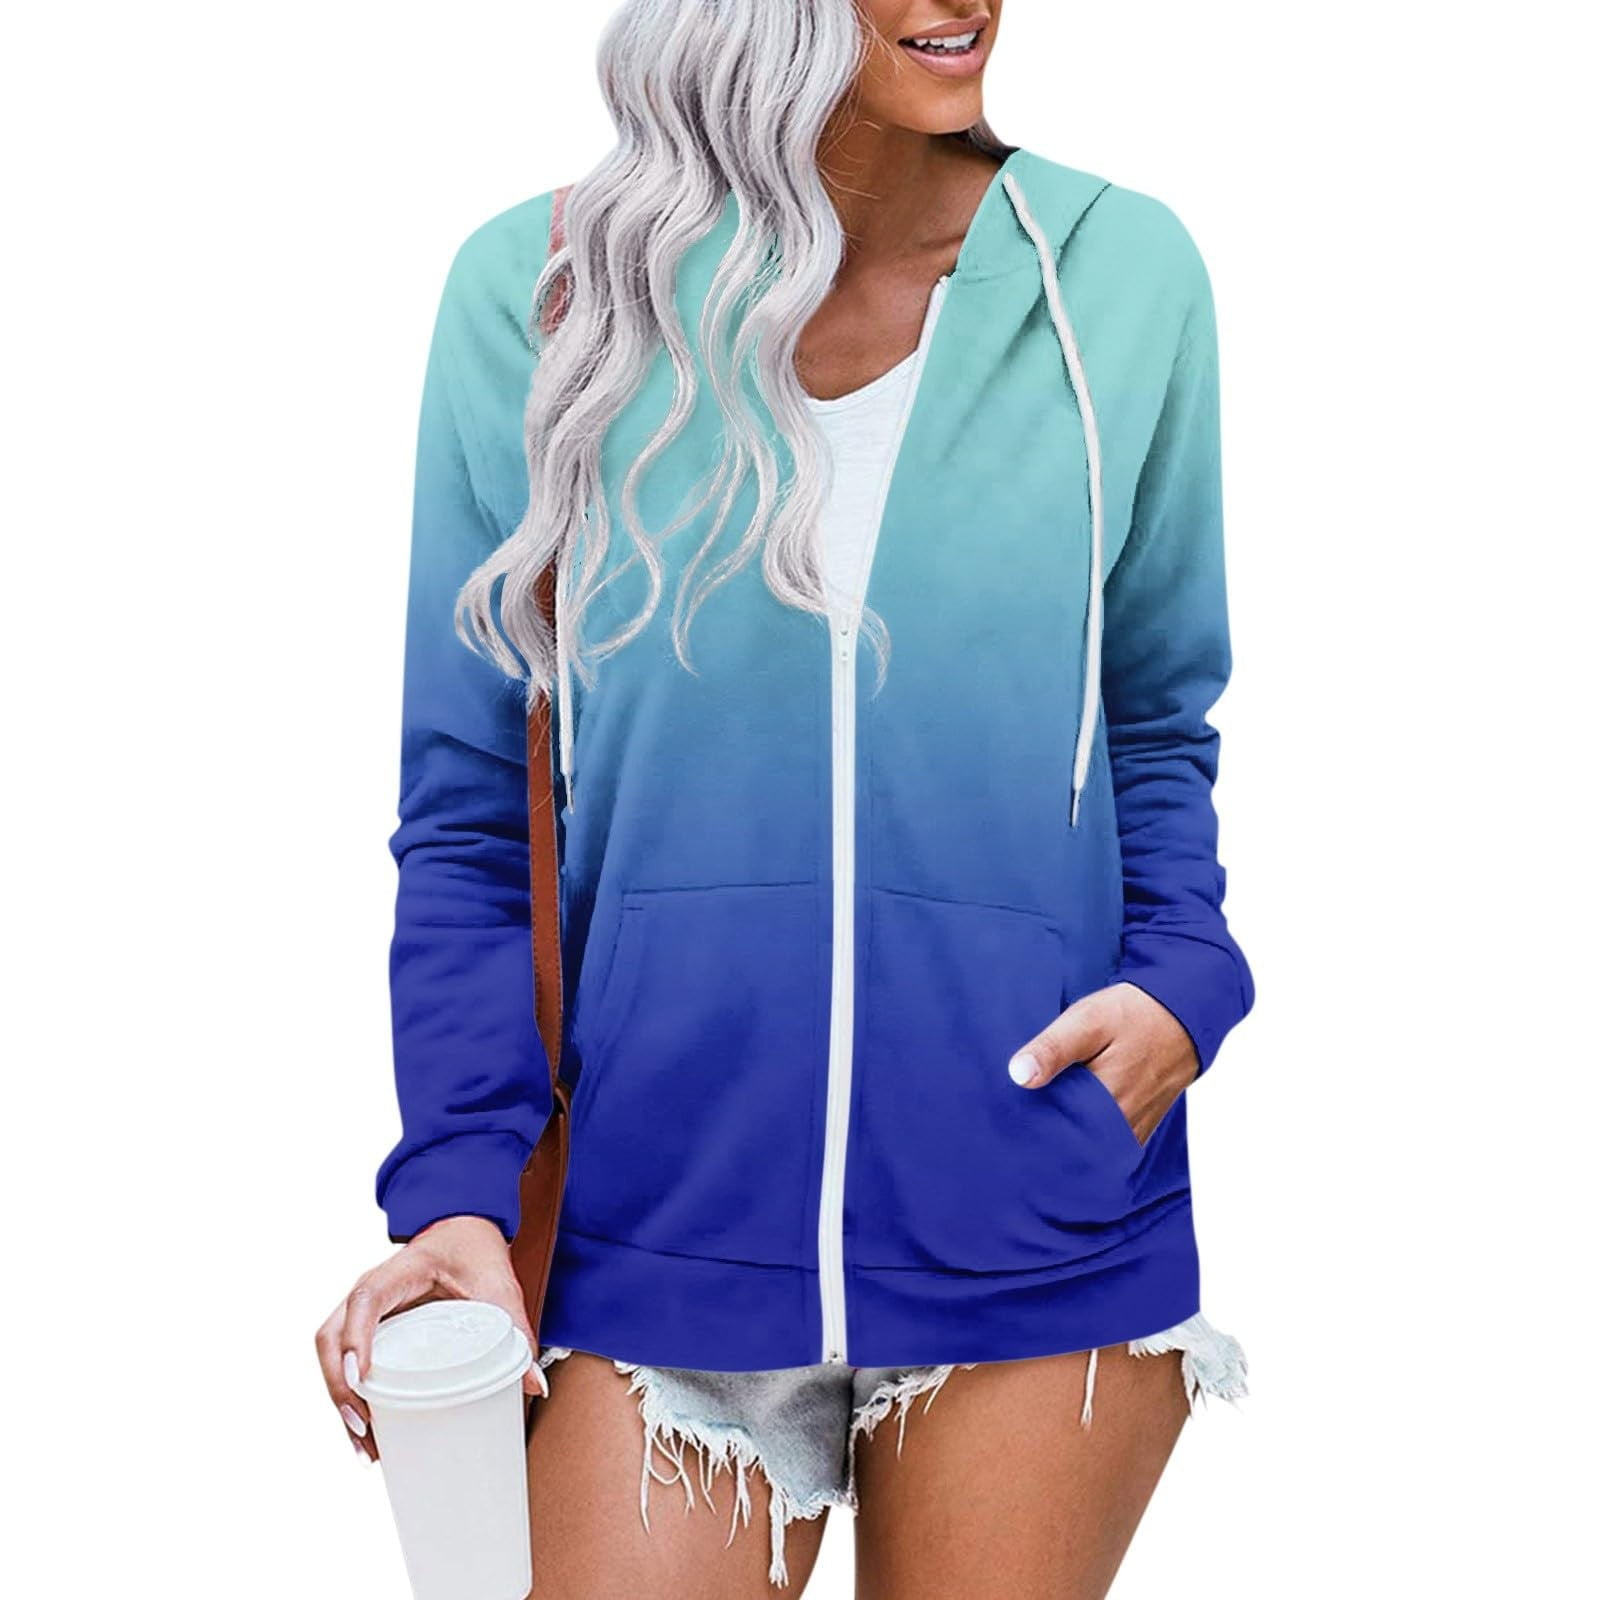 Jacenvly Hoodies for Women Clearance Gradient Color Long Sleeve ...